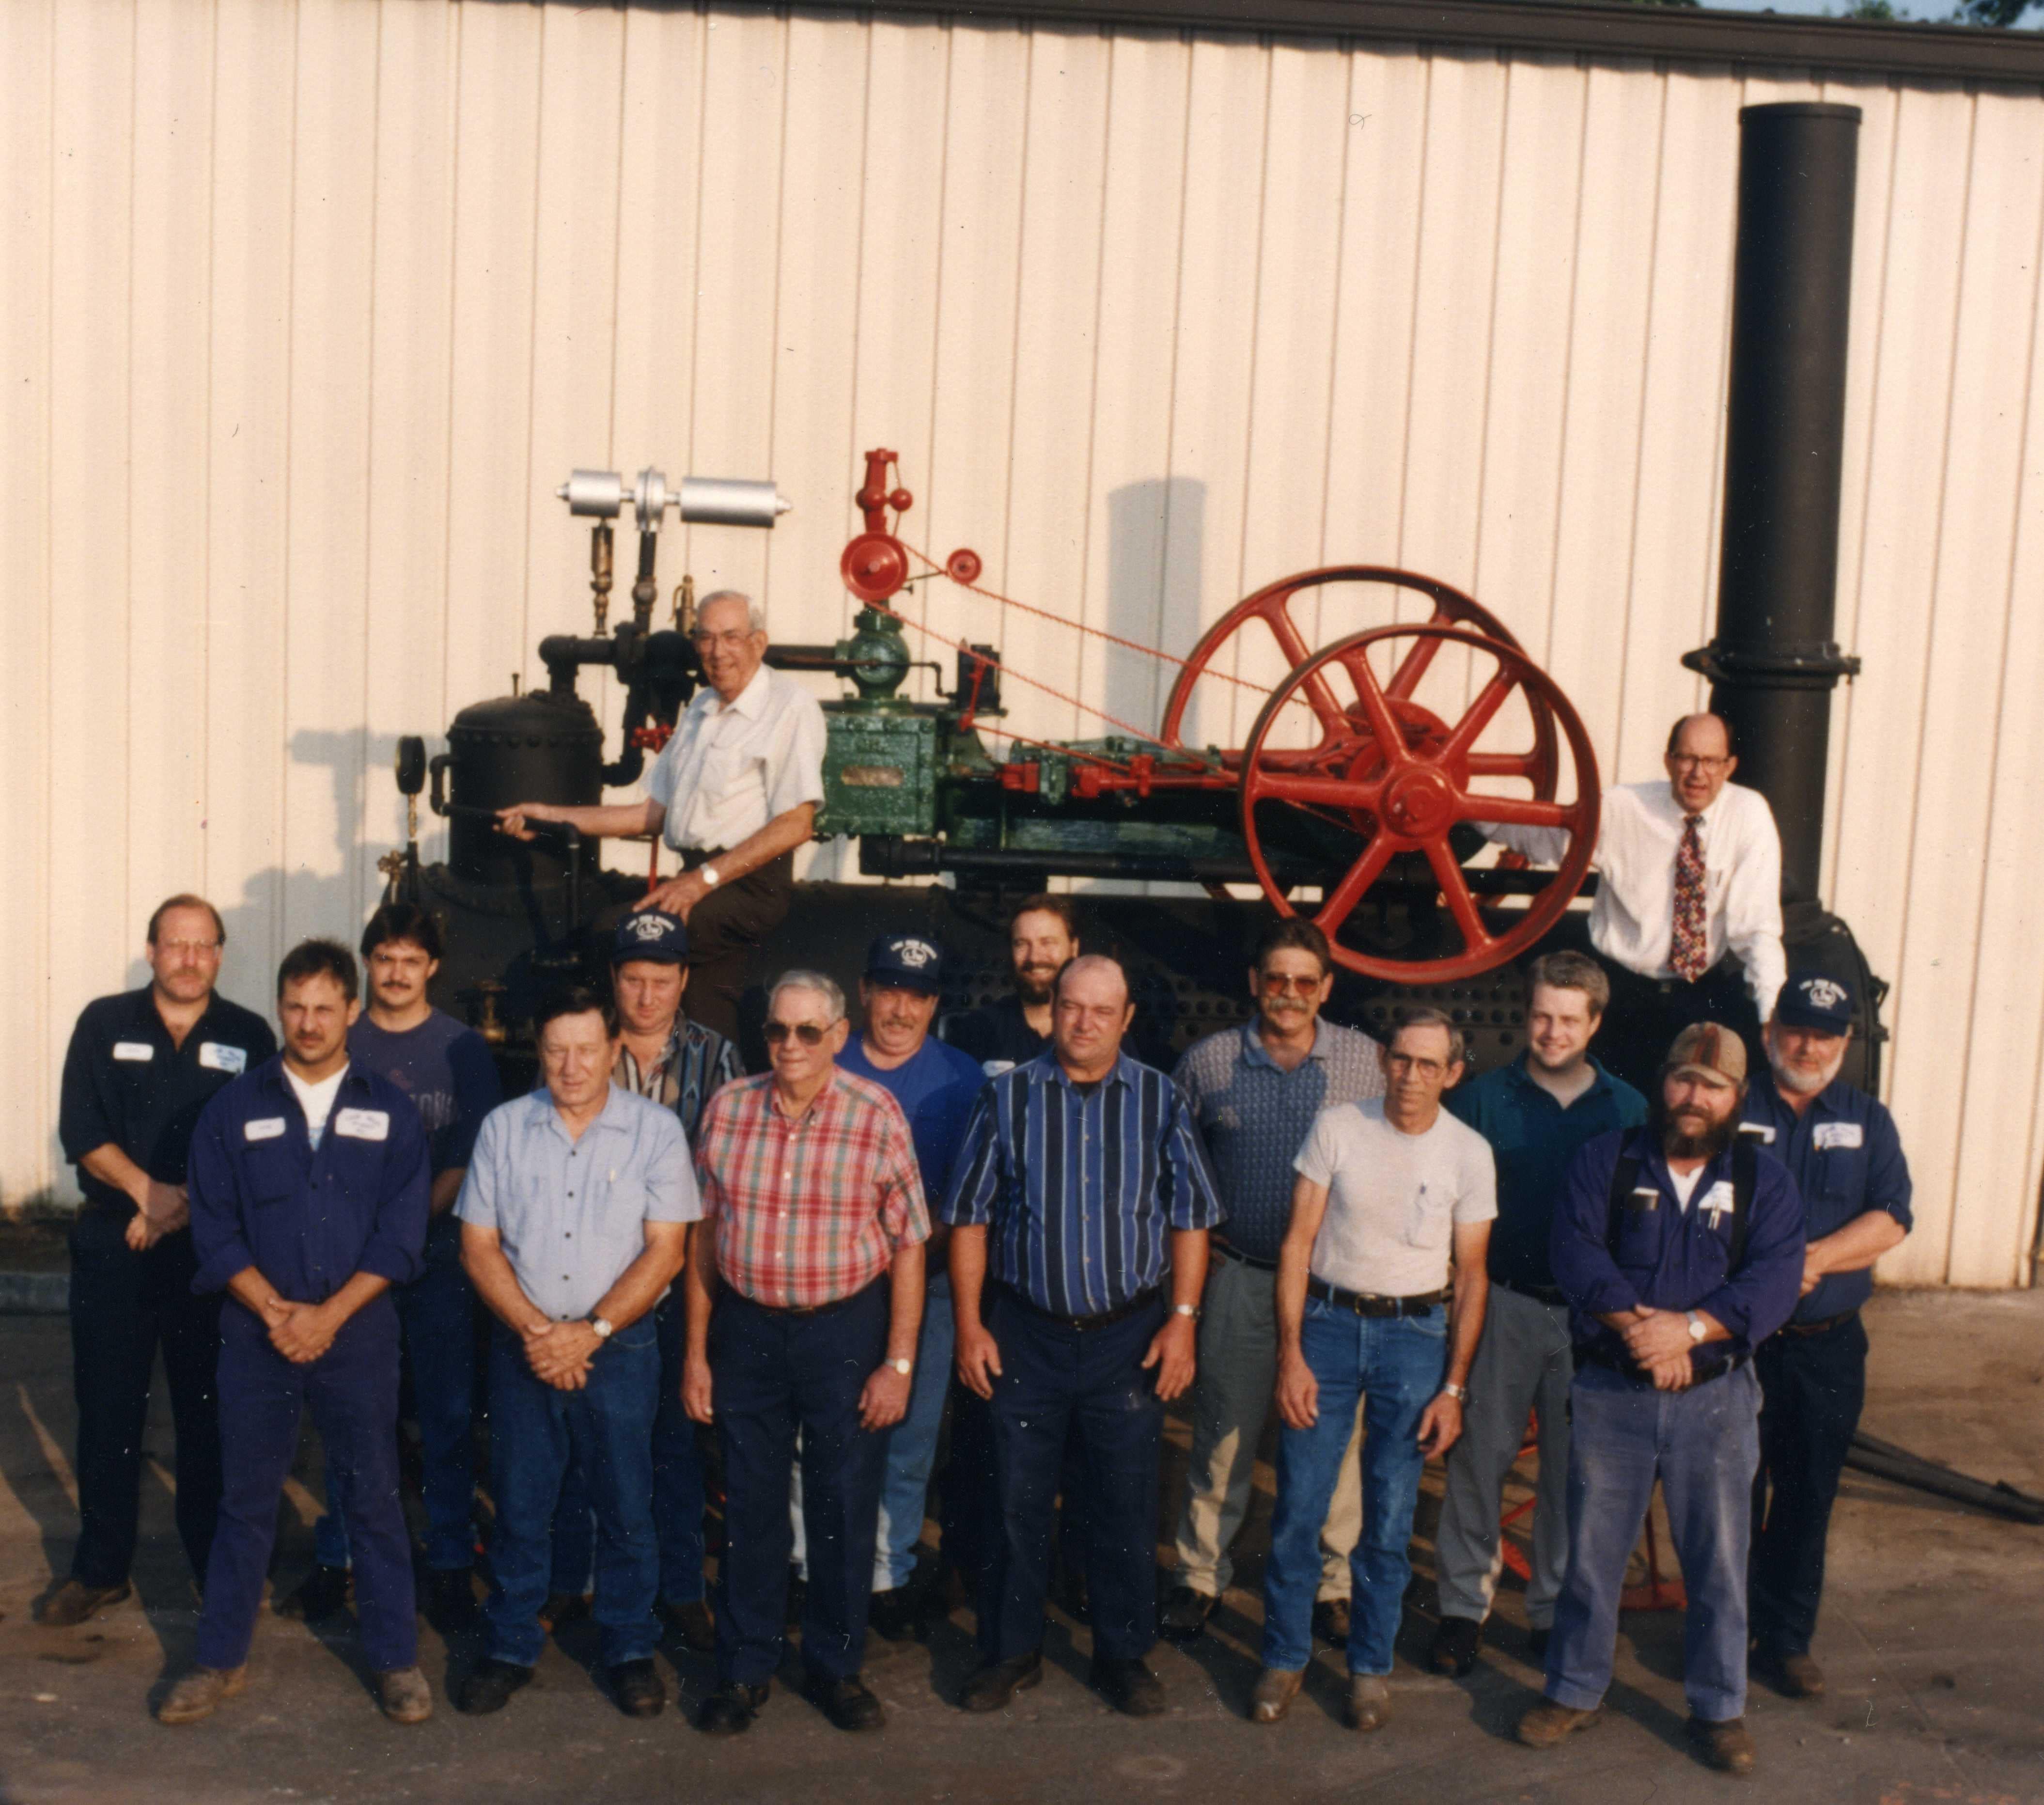 Circa 1997 - Founder John Link with employees
